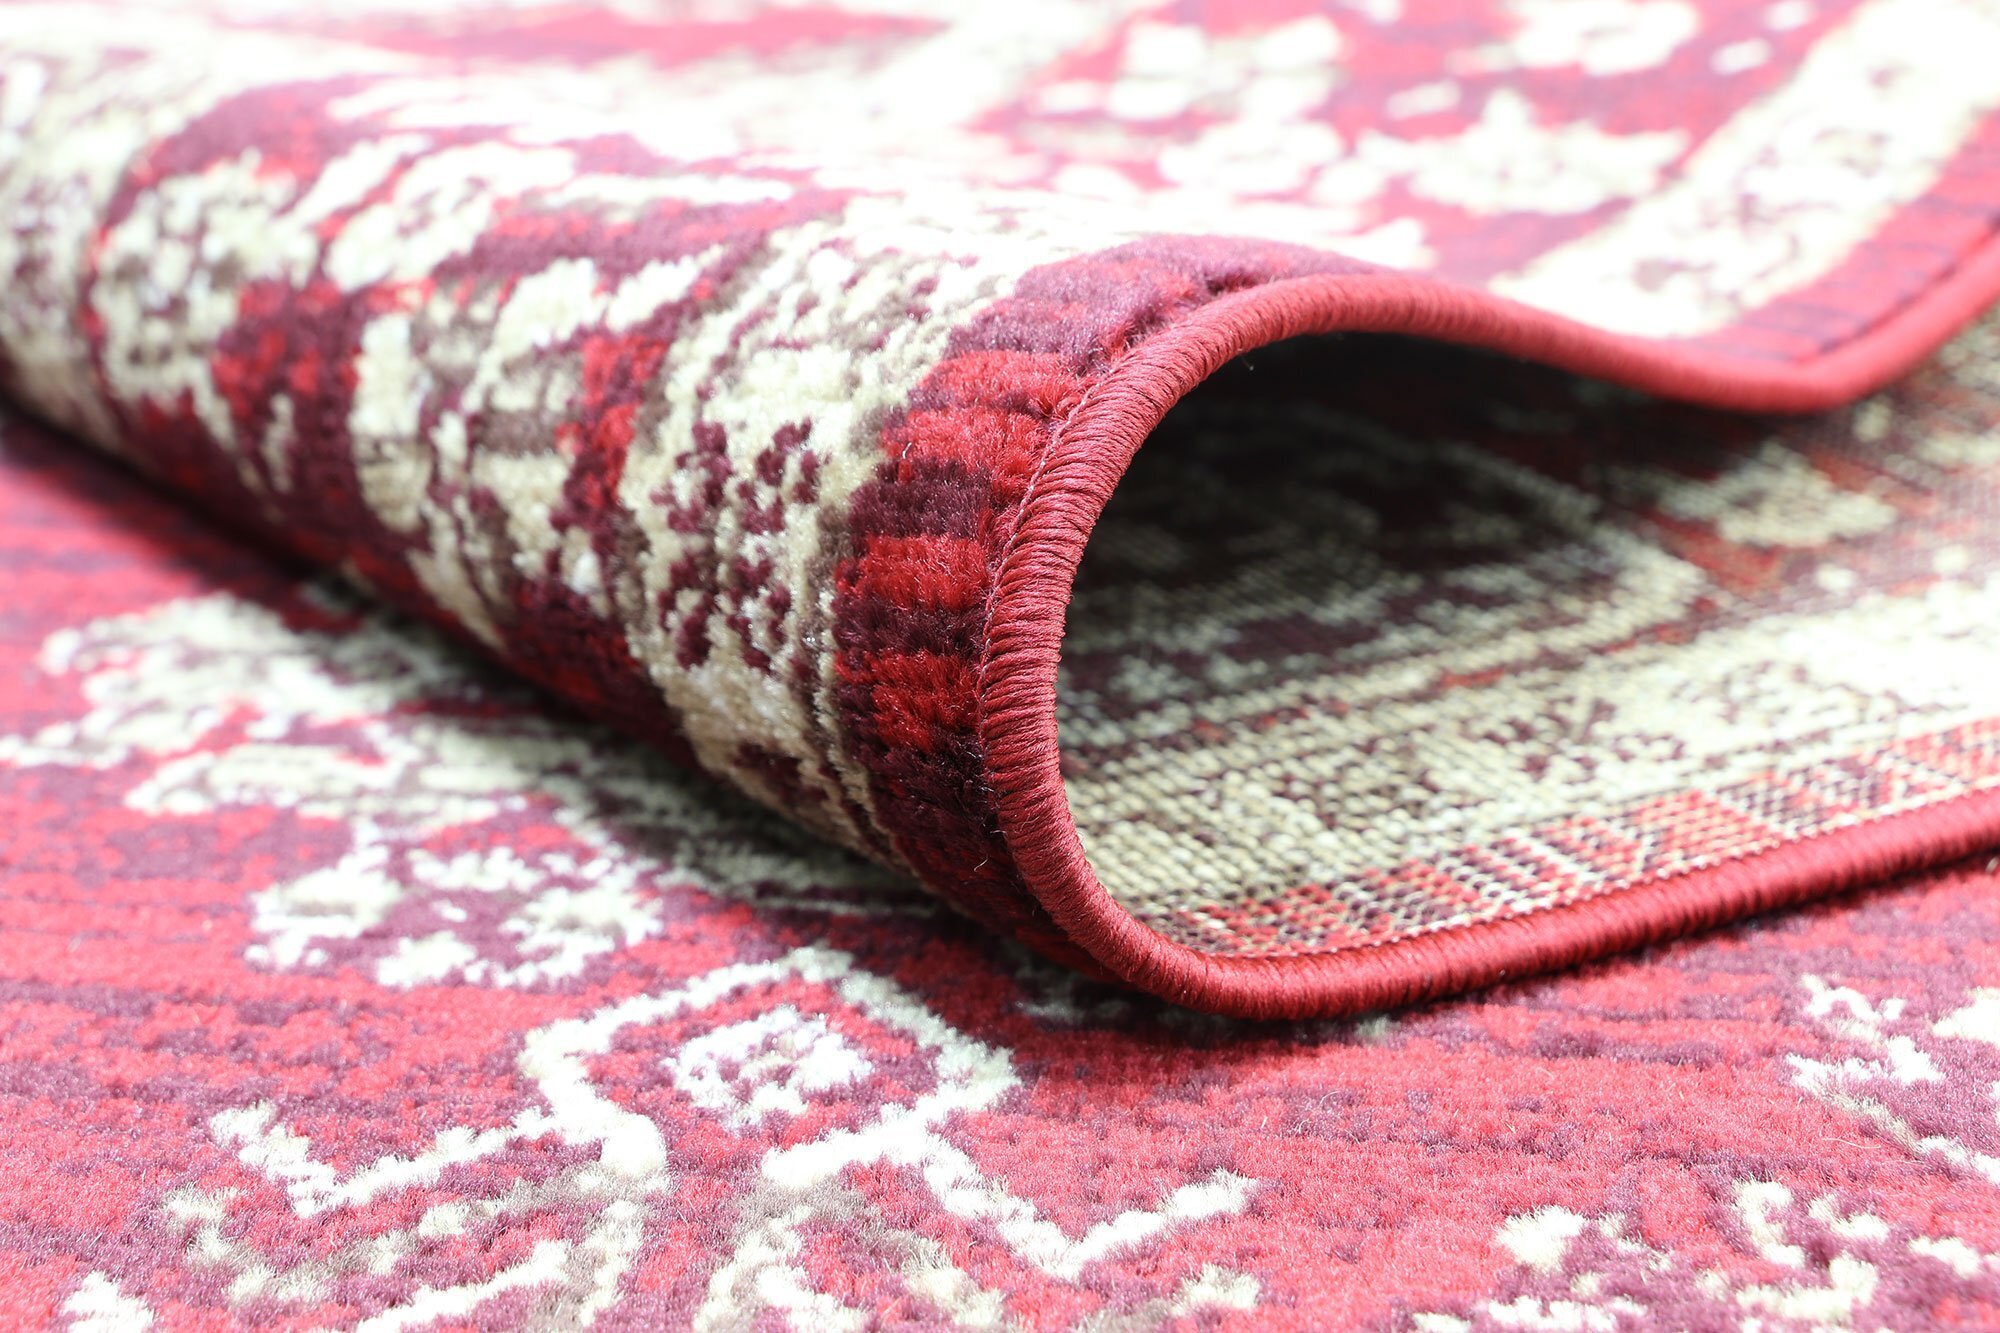 Alfred Traditional Overdyed Rug